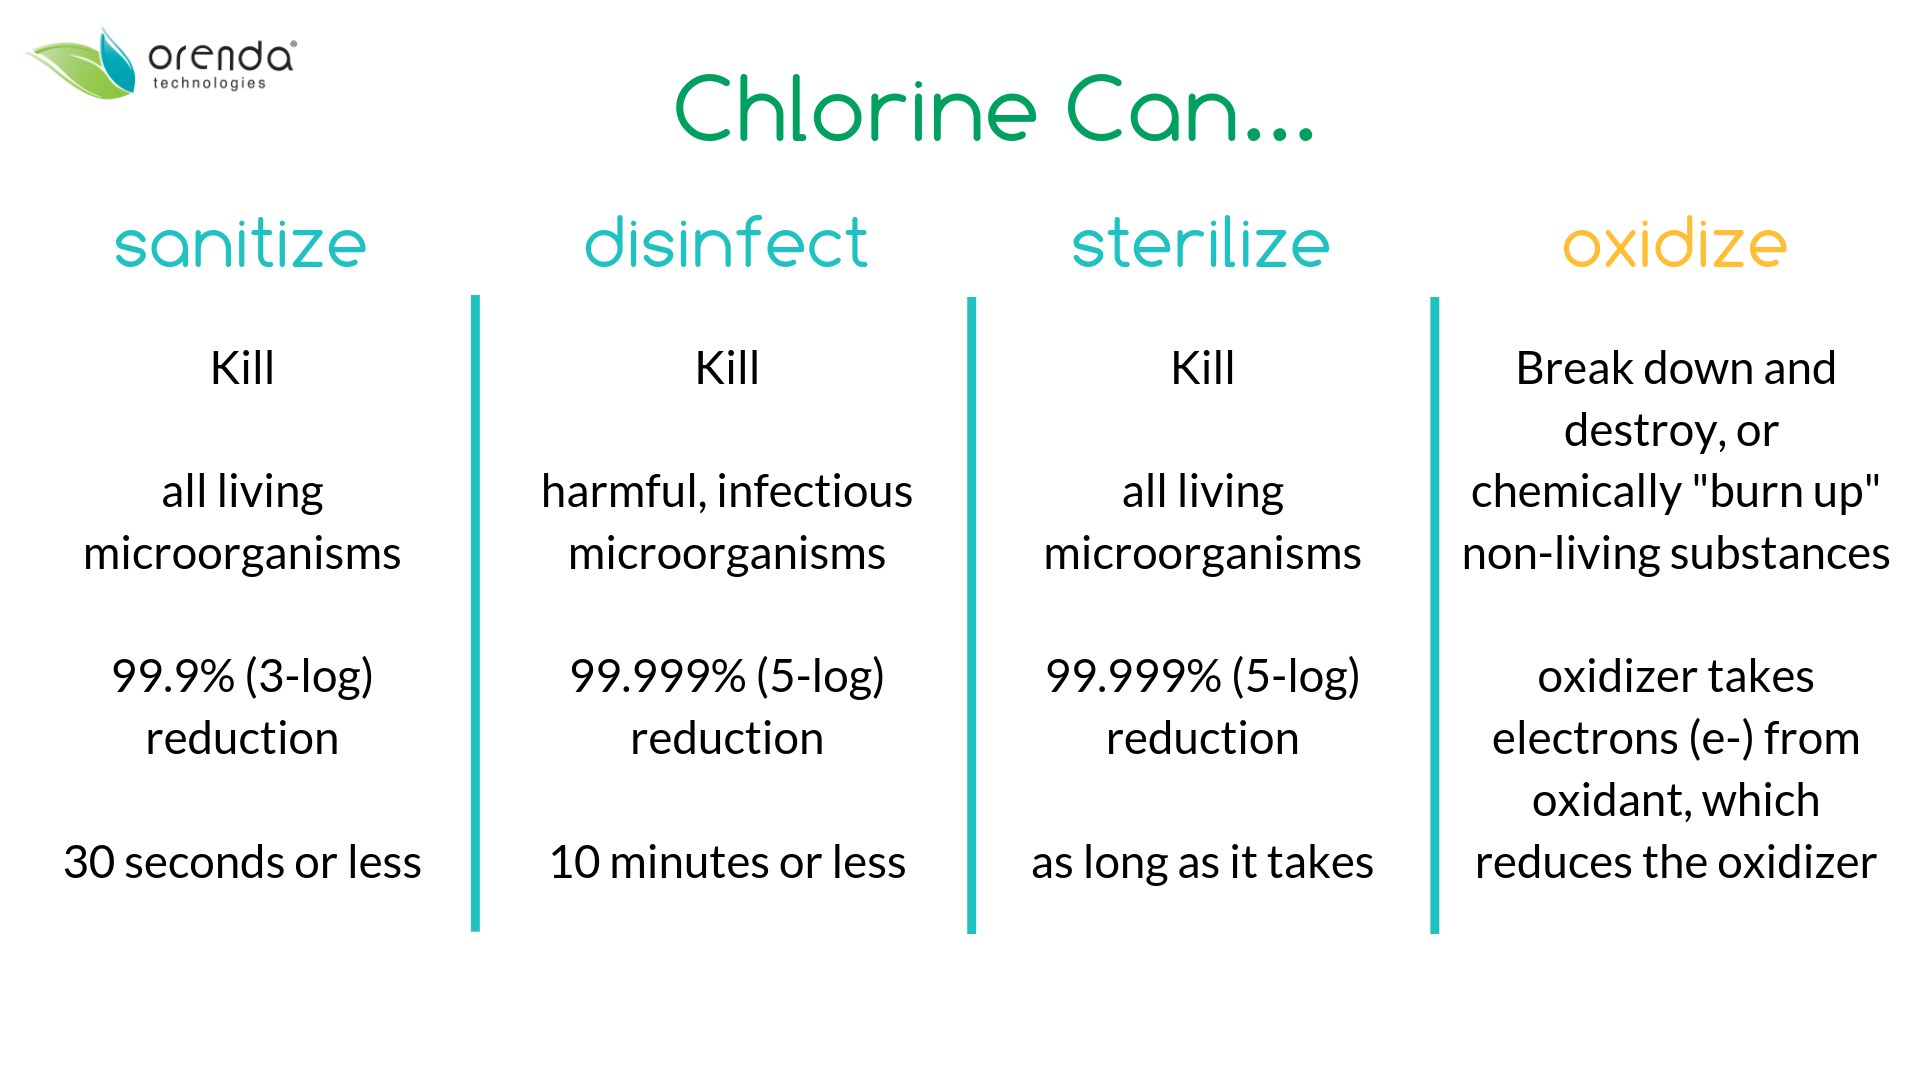 chlorine can oxidize, sanitize, disinfect